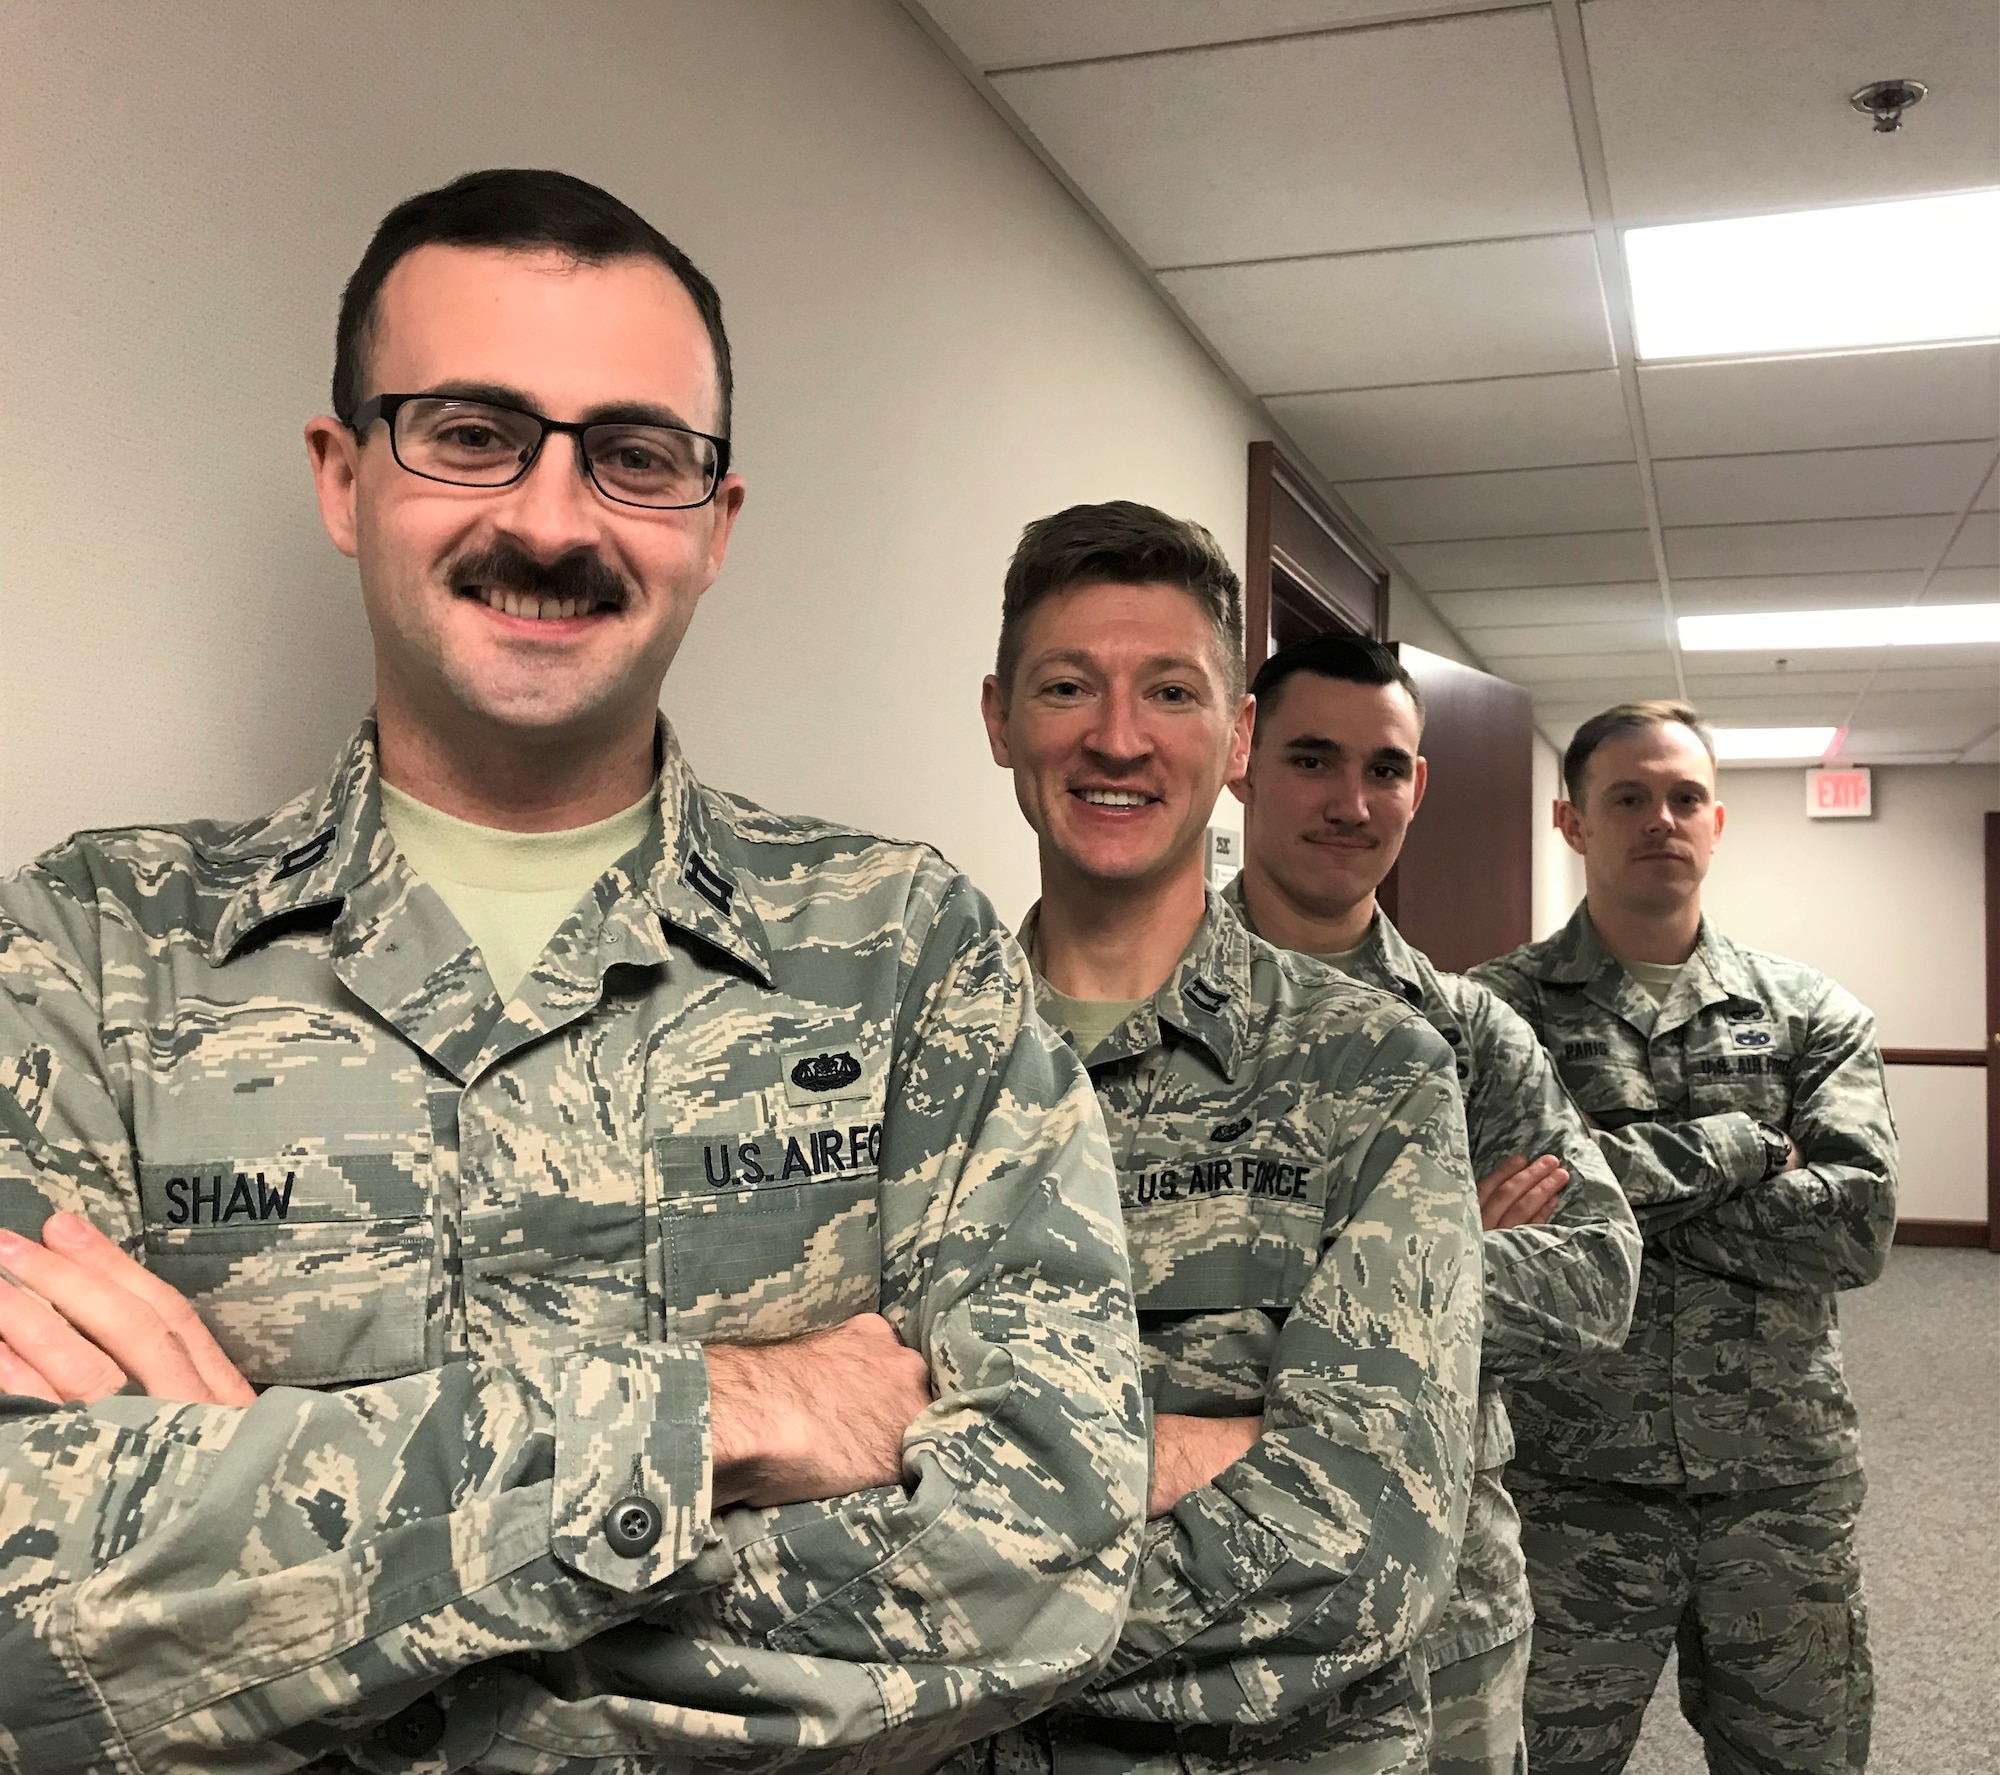 Left to right, Capt. Tim Shaw, Capt. John Lipscomb, Staff Sgt. Dakota Herndon and Tech Sgt. Matt Paris and from the 88th Air Base Wing Judge Advocates office, are growing mustaches in support of Mustache Movember. Movember is an annual event of growing mustaches during the month of November to bring awareness to men’s health issues such as prostate, testicular cancer and mental health.  (U.S. Air Force photo by Stacey Geiger)